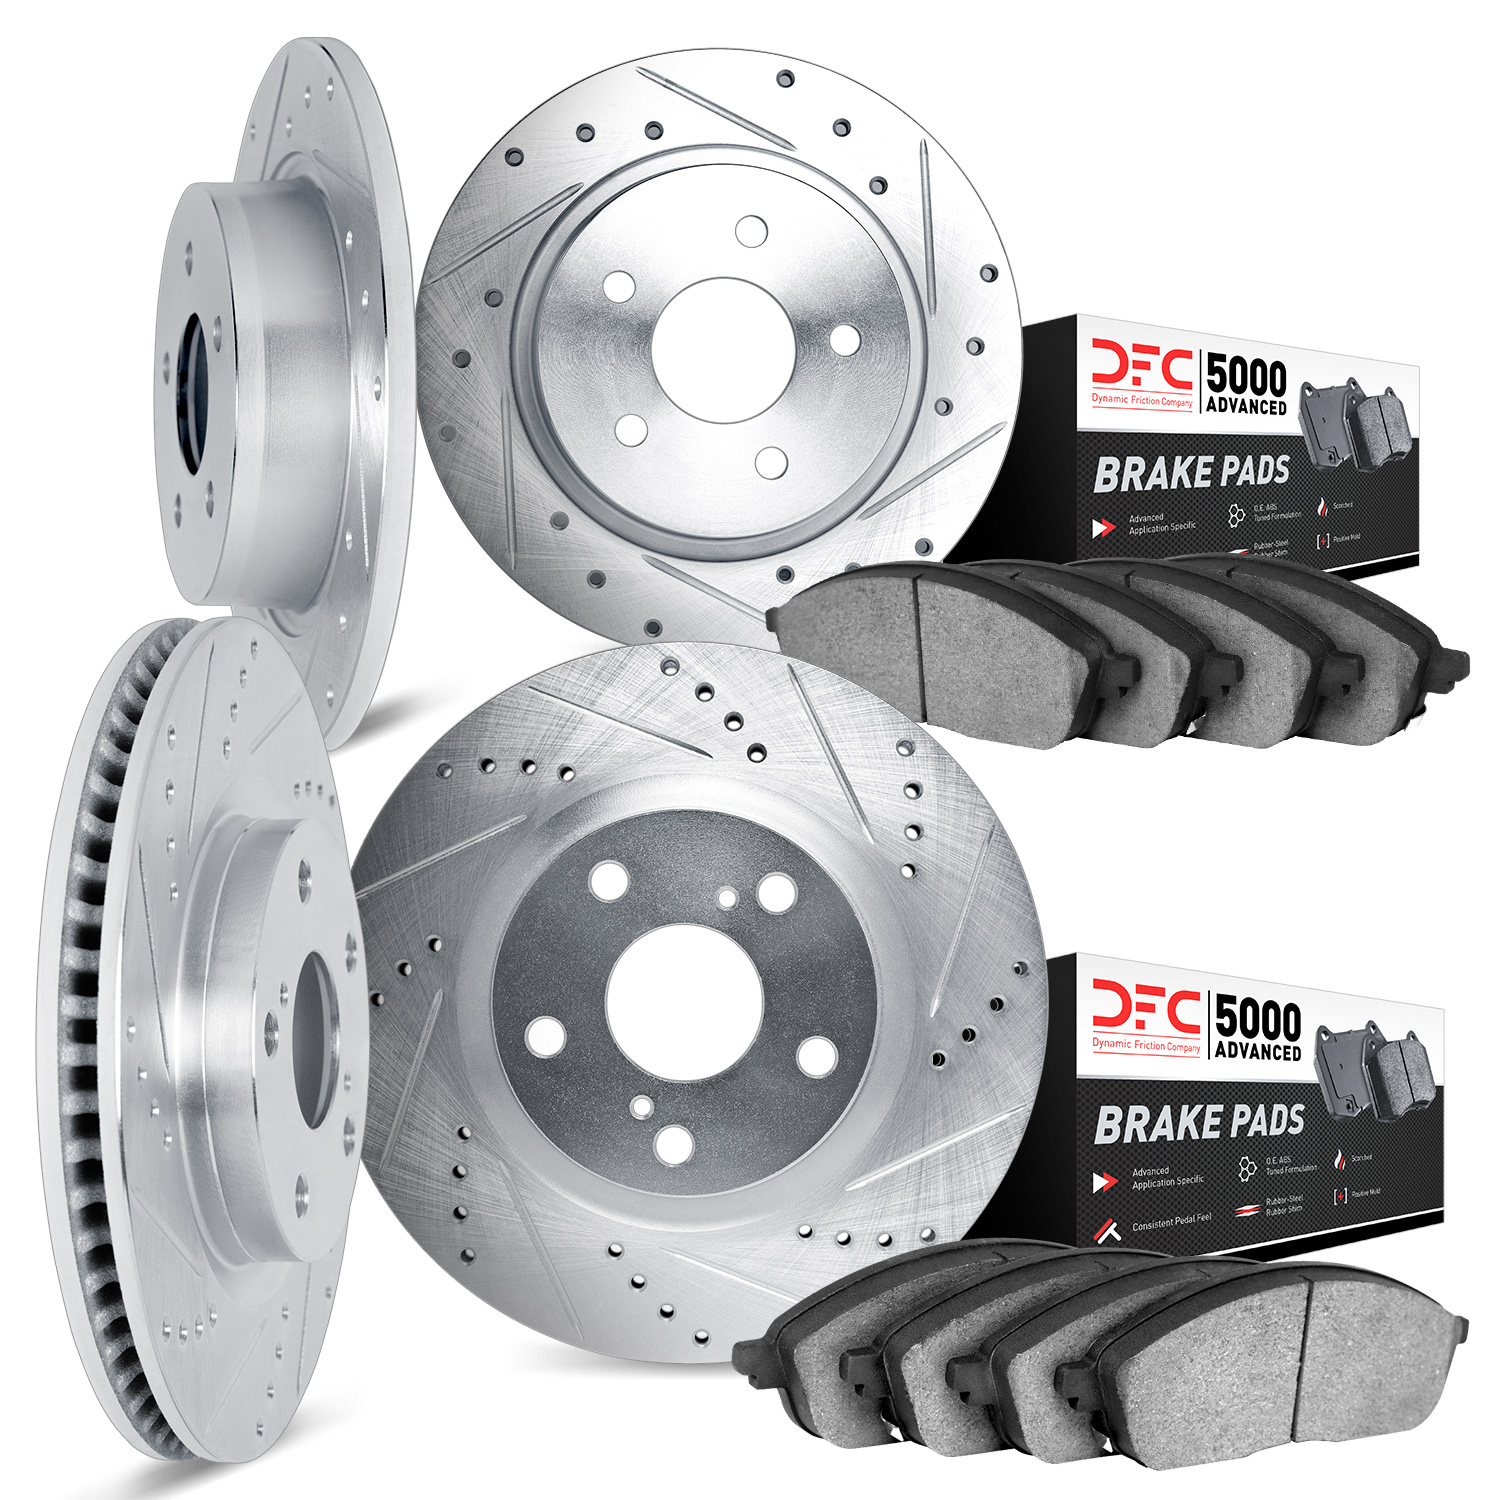 7504-54359 Drilled/Slotted Brake Rotors w/5000 Advanced Brake Pads Kit [Silver], 2005-2007 Ford/Lincoln/Mercury/Mazda, Position: